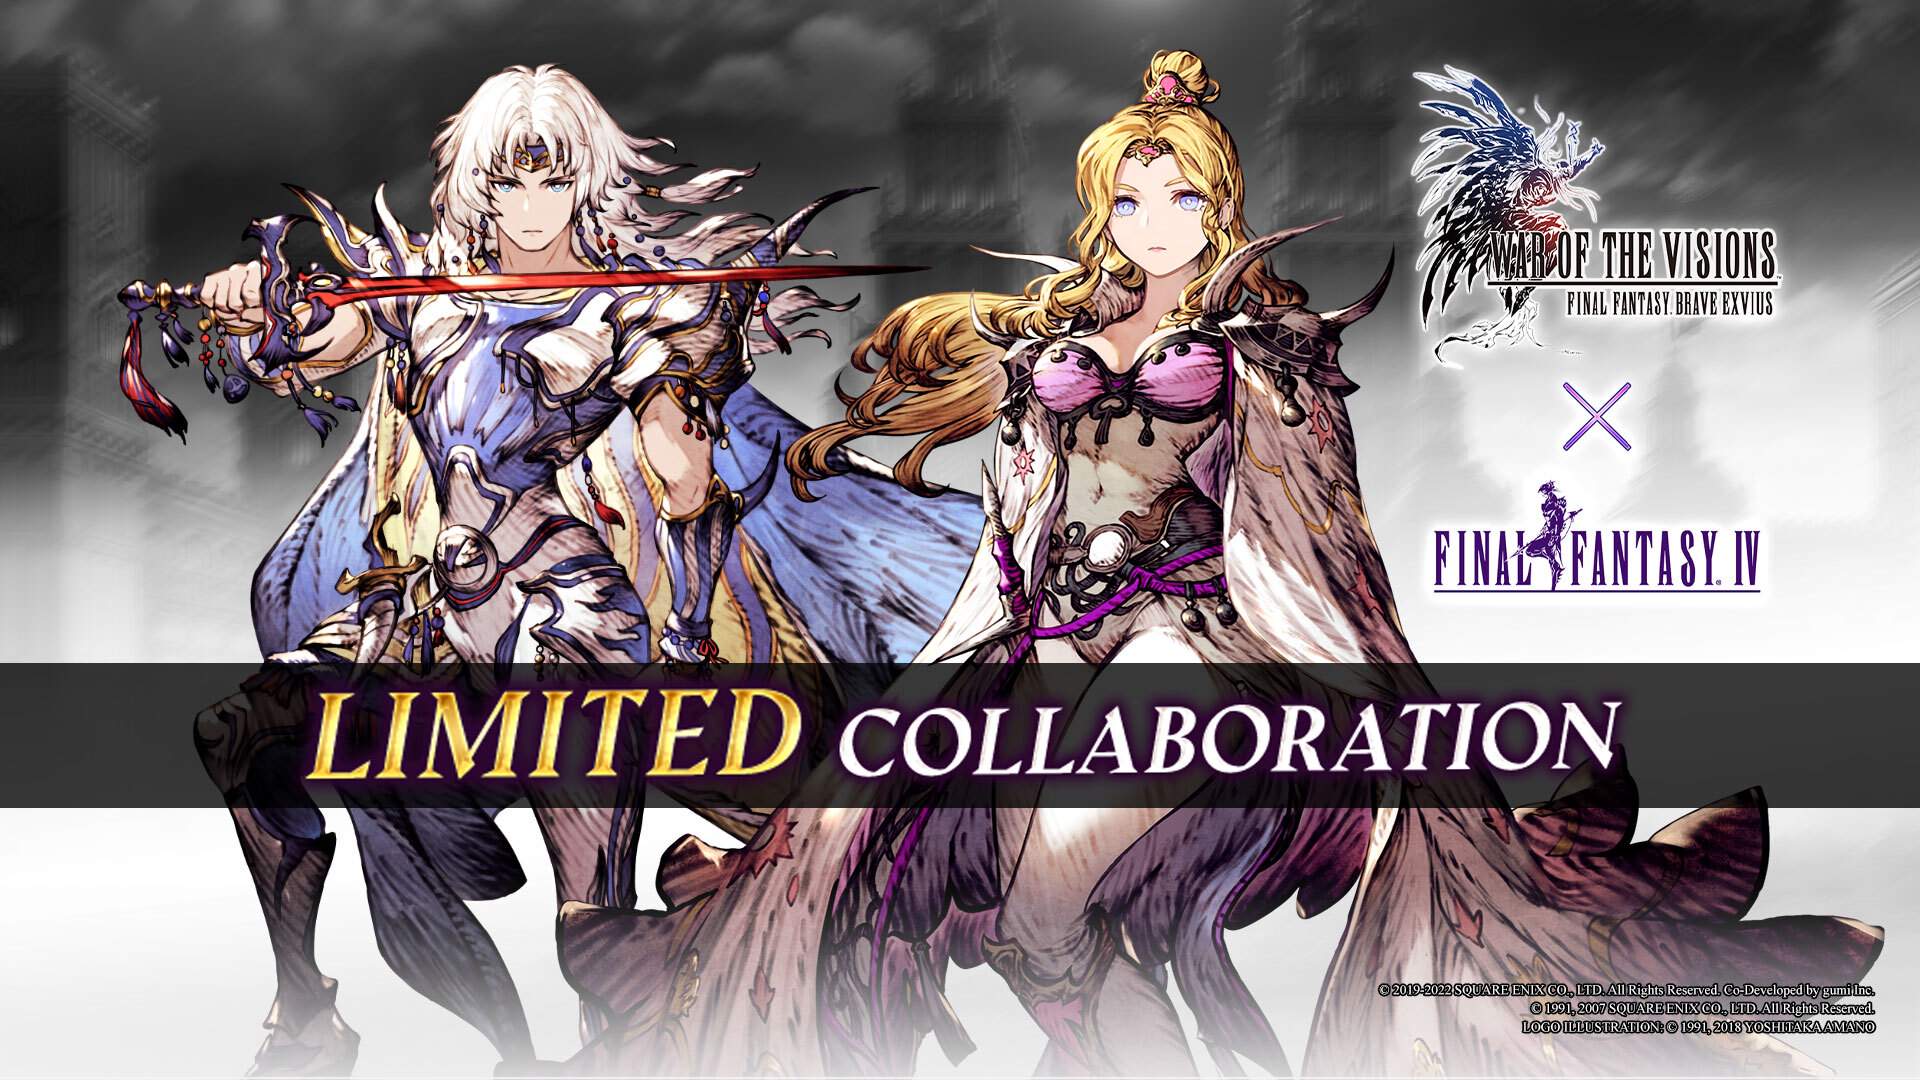 Final Fantasy X collaboration item comes up!